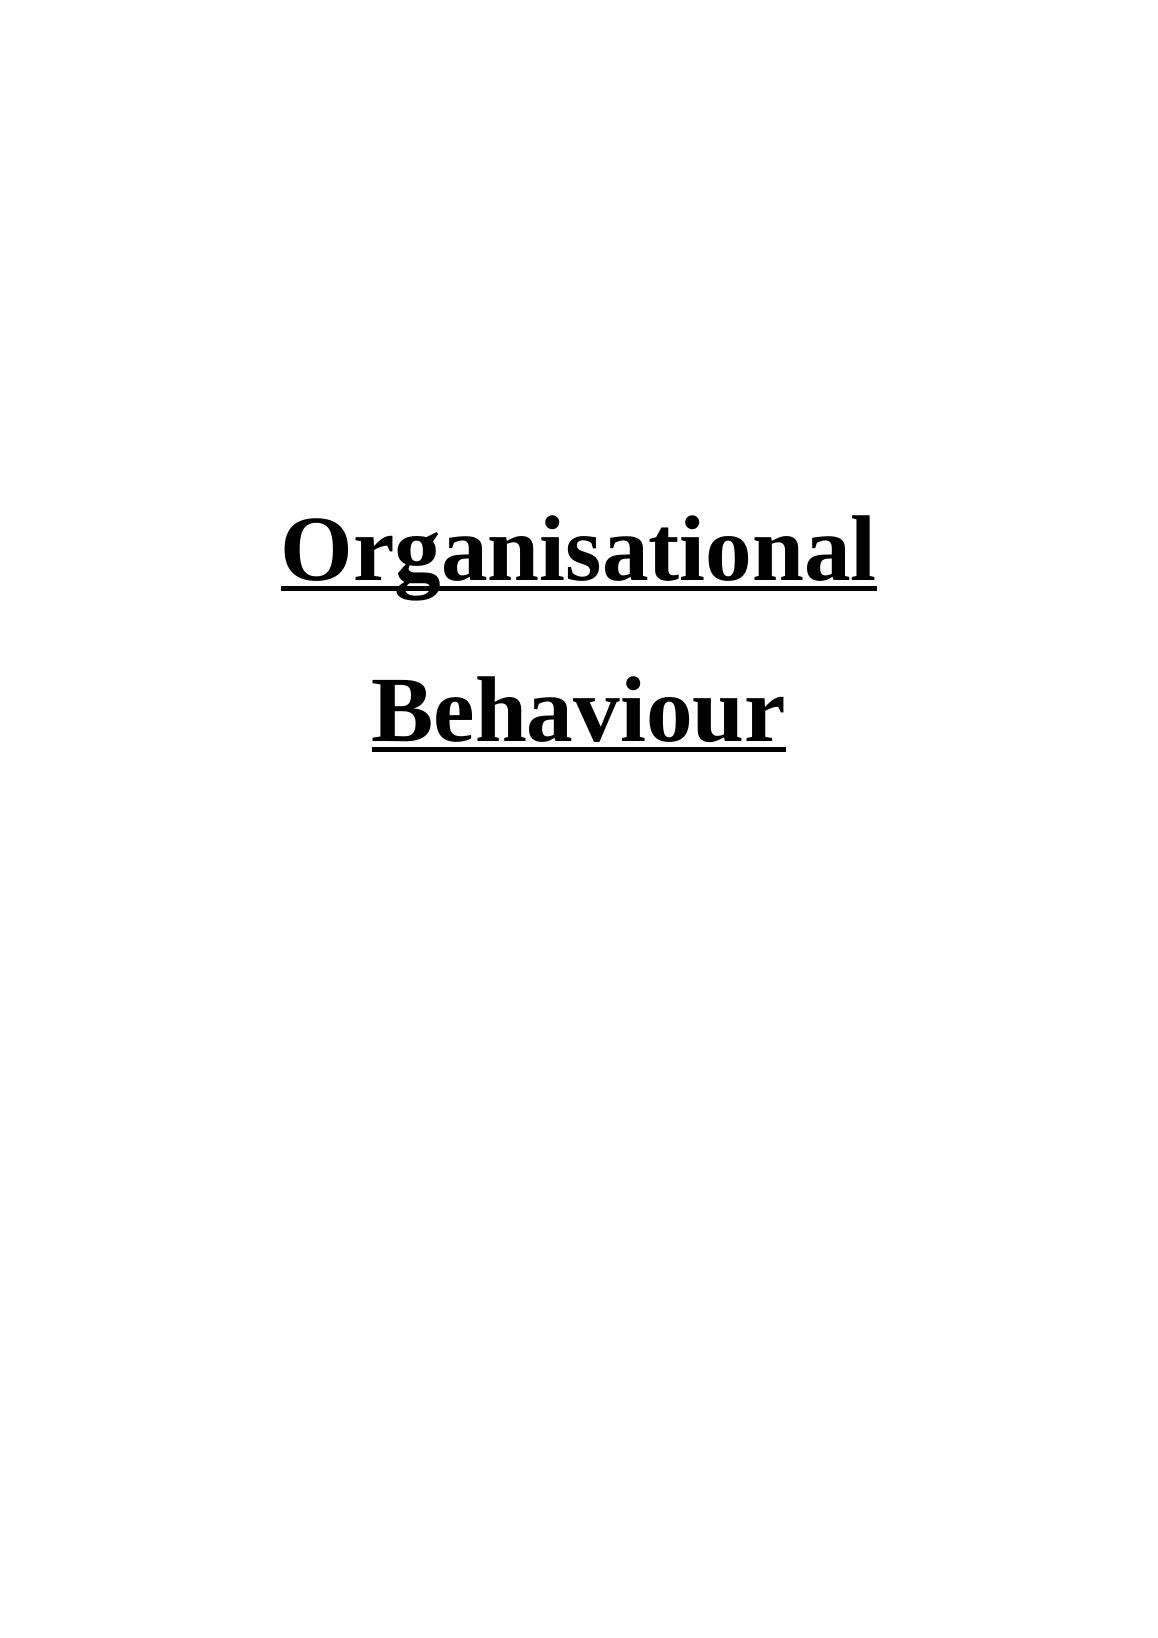 Organisational Behaviour: Impact of Culture, Power, and Motivation on Individual Behaviour_1